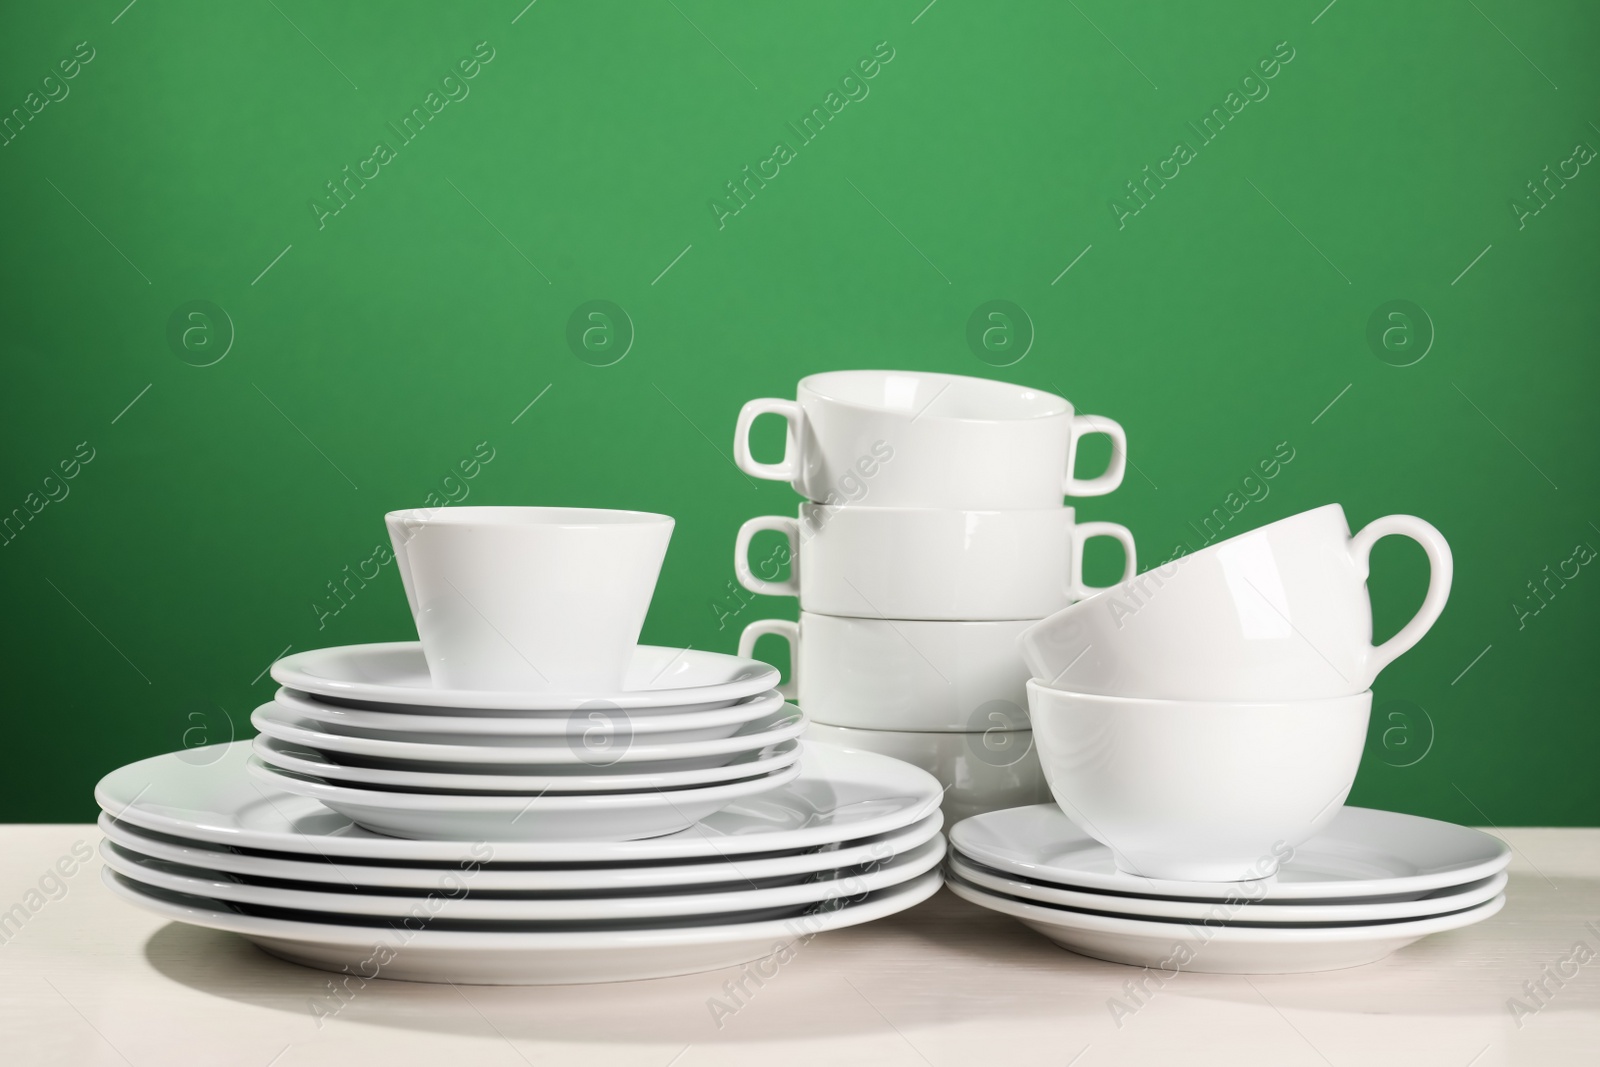 Photo of Set of clean dishware on white table against green background